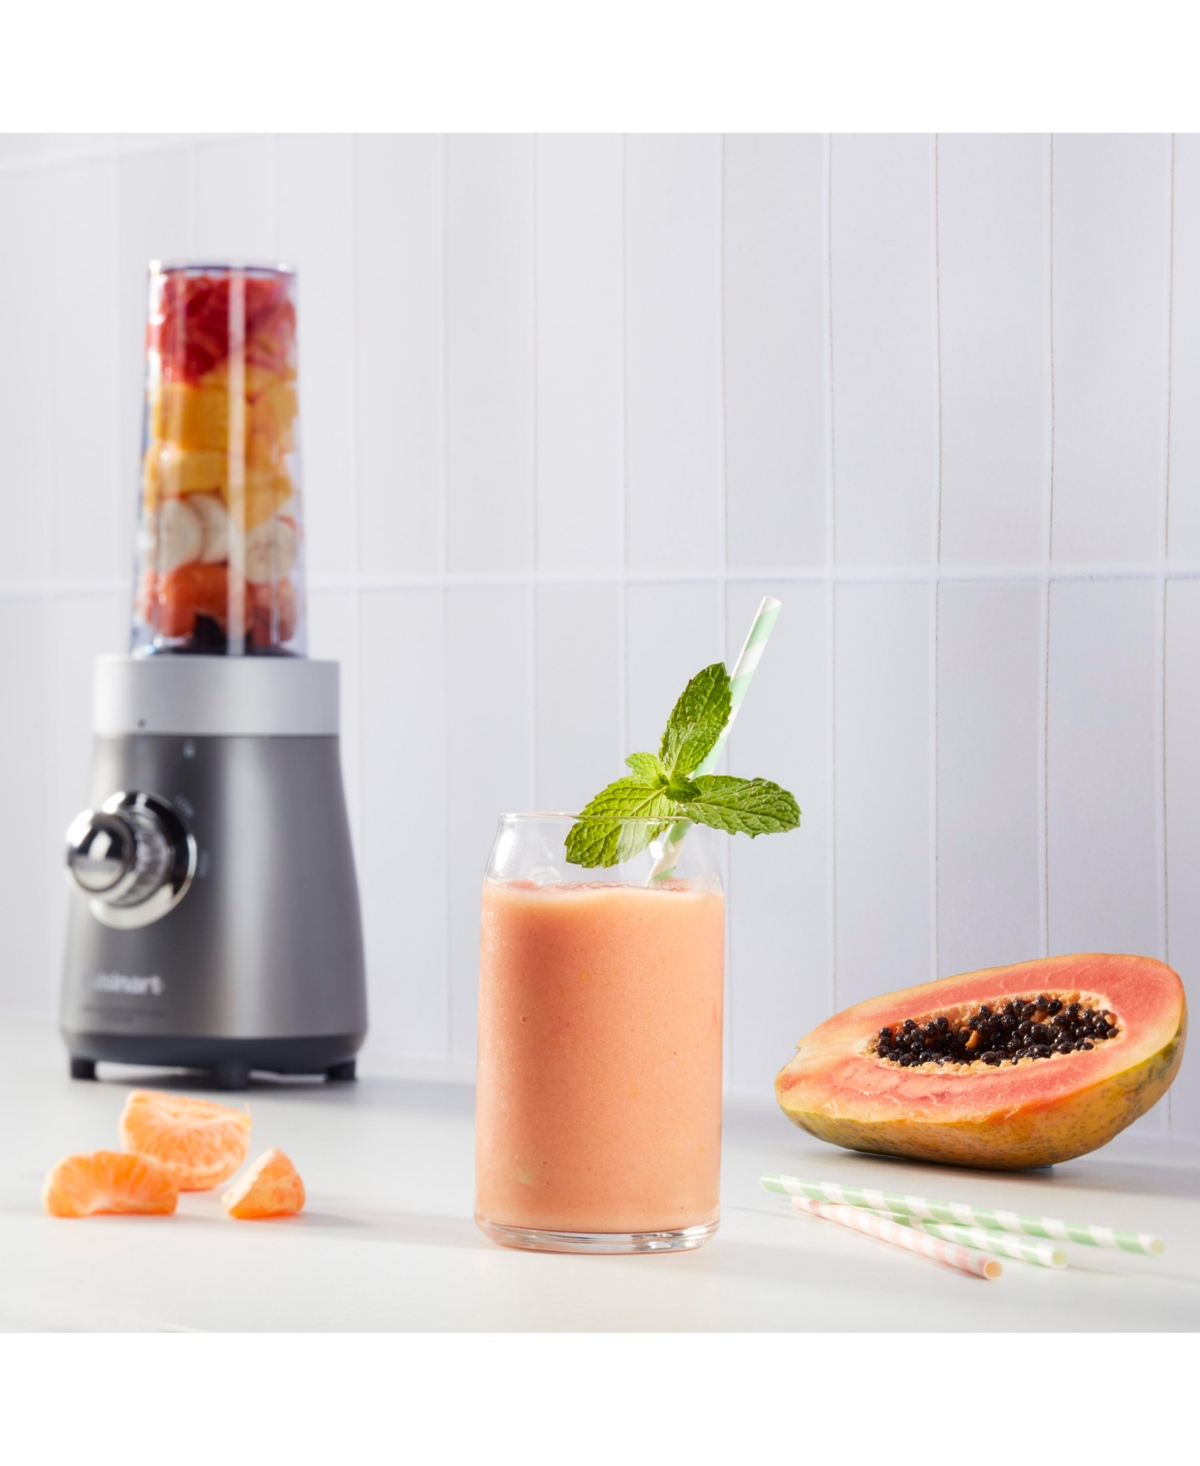 Shop Cuisinart Compact Blender And Juice Extractor Combo In Stainless Steel